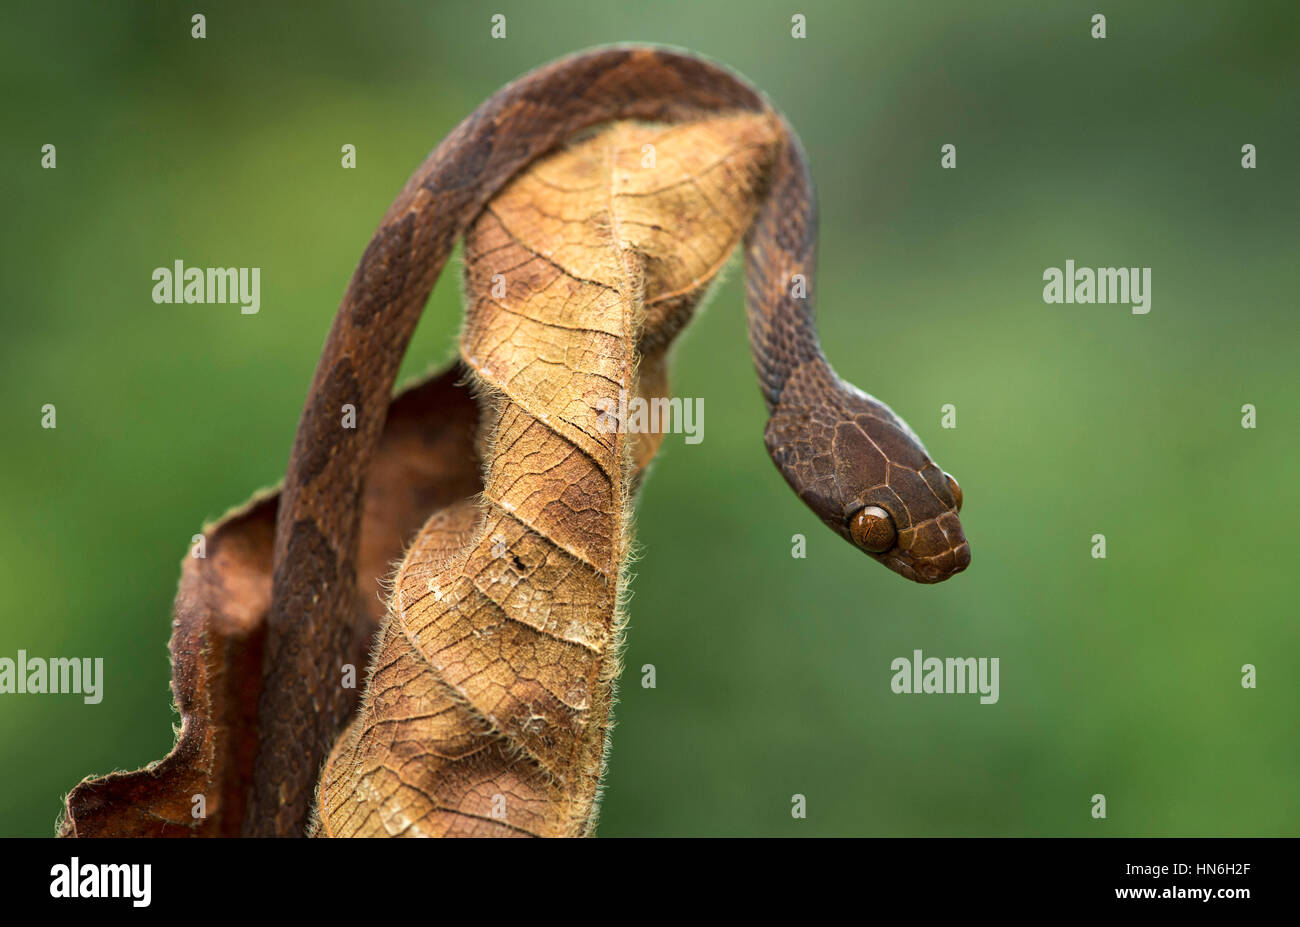 Blunthead tree snake (Imantodes cenchoa) on dry plant, Amazon rainforest, Canande River Nature Reserve, Choco forest, Ecuador Stock Photo